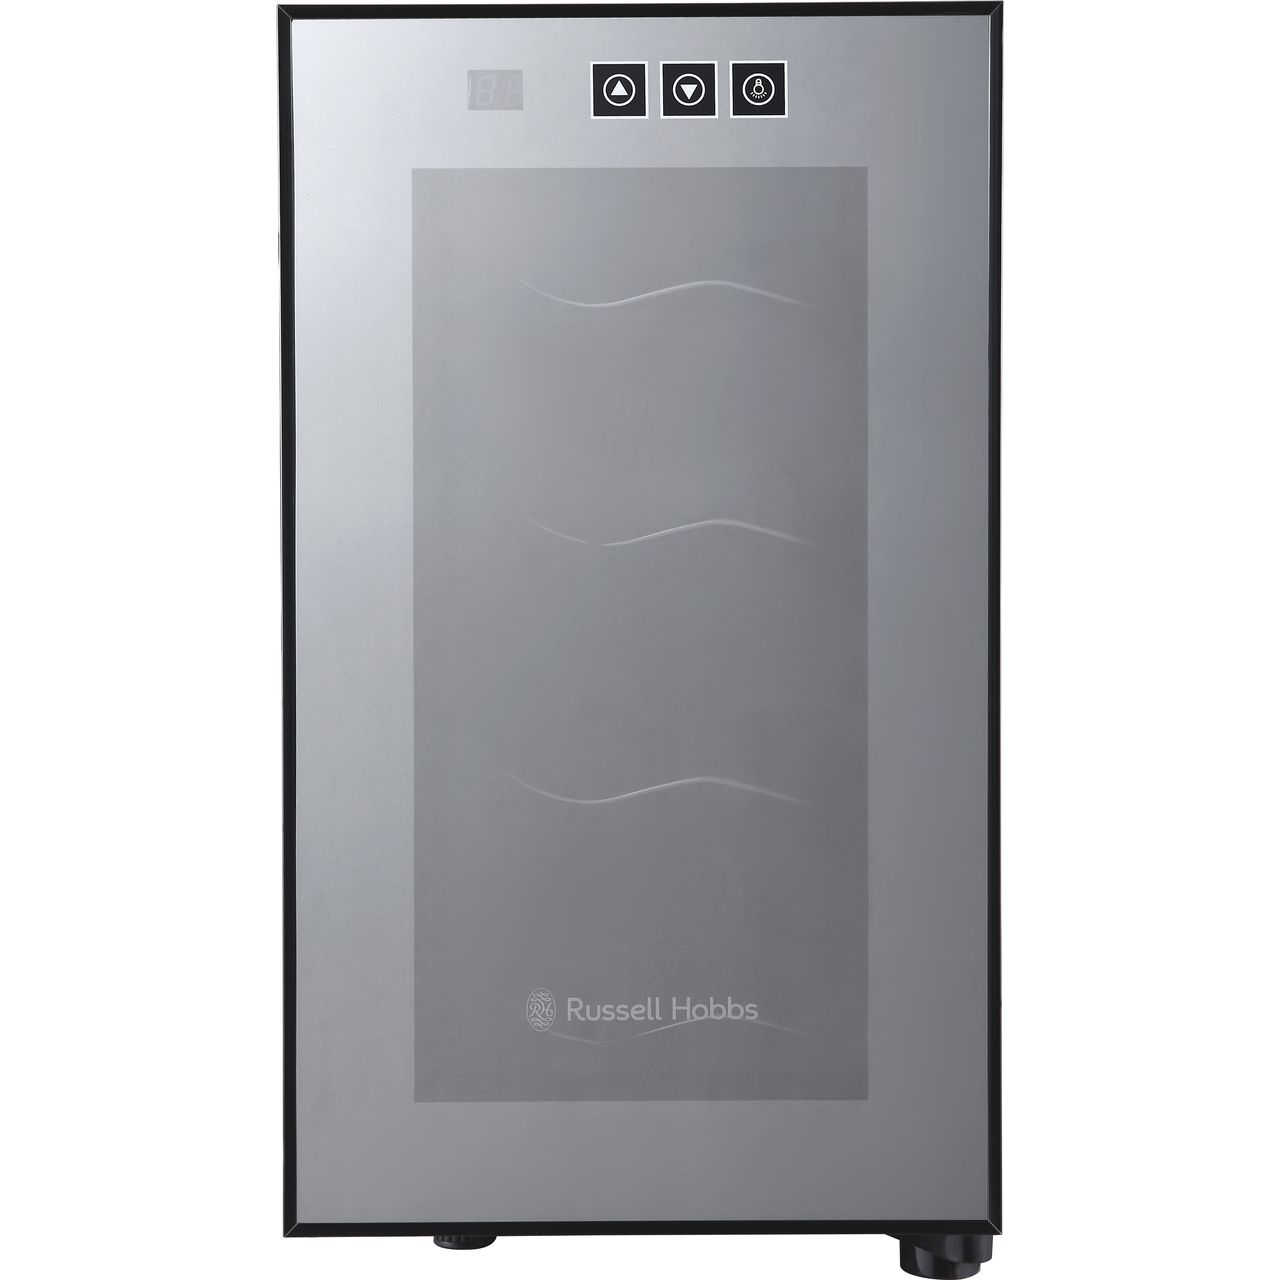 Russell Hobbs RH8WC2 Wine Cooler Review